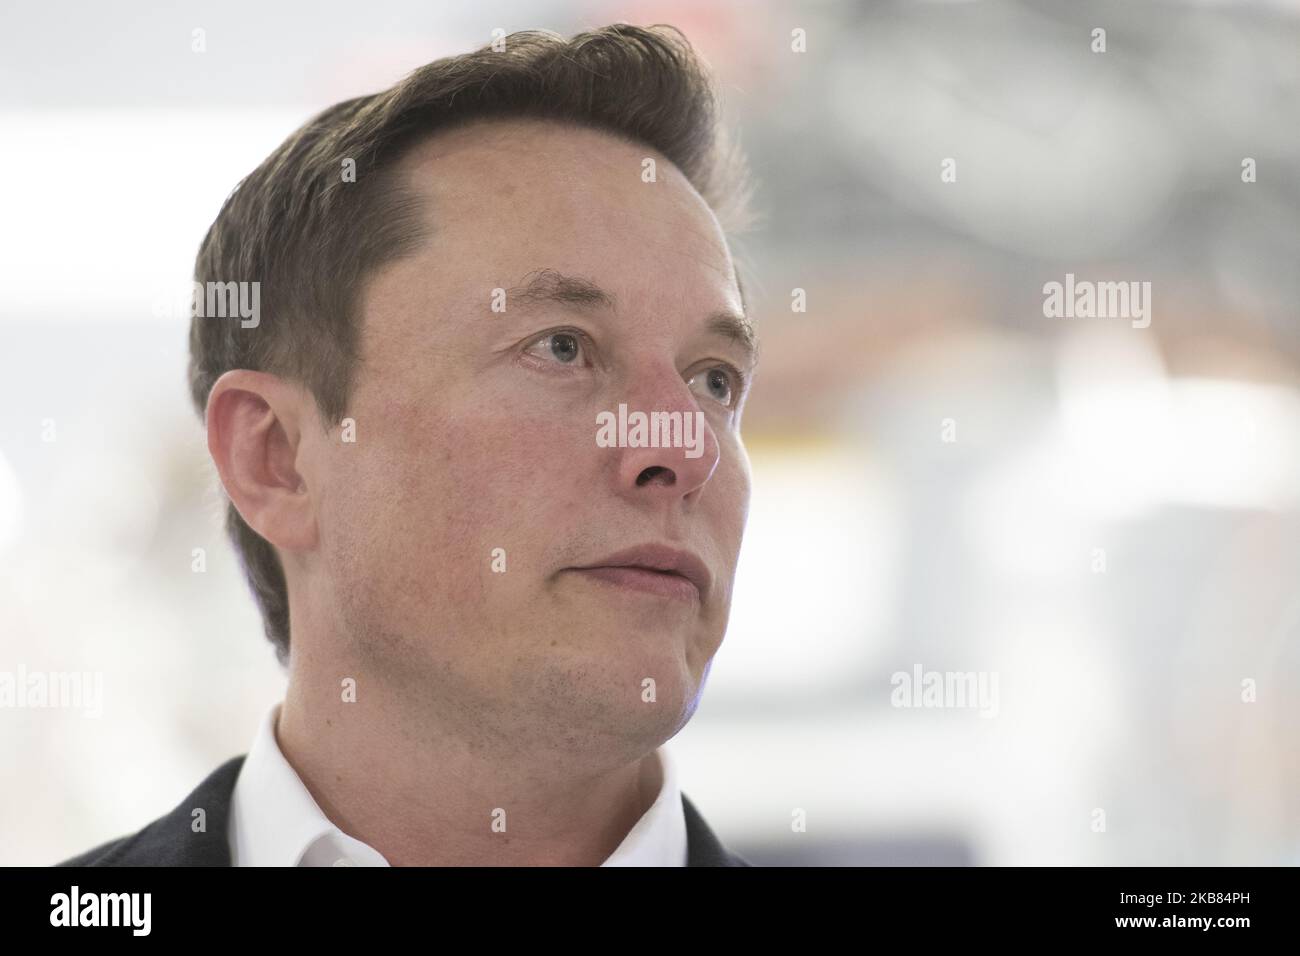 SpaceX Chief Engineer Elon Musk speaks in front of Crew Dragon cleanroom at SpaceX Headquarters in Hawthorne, California on October 10, 2019. (Photo by Yichuan Cao/NurPhoto) Stock Photo